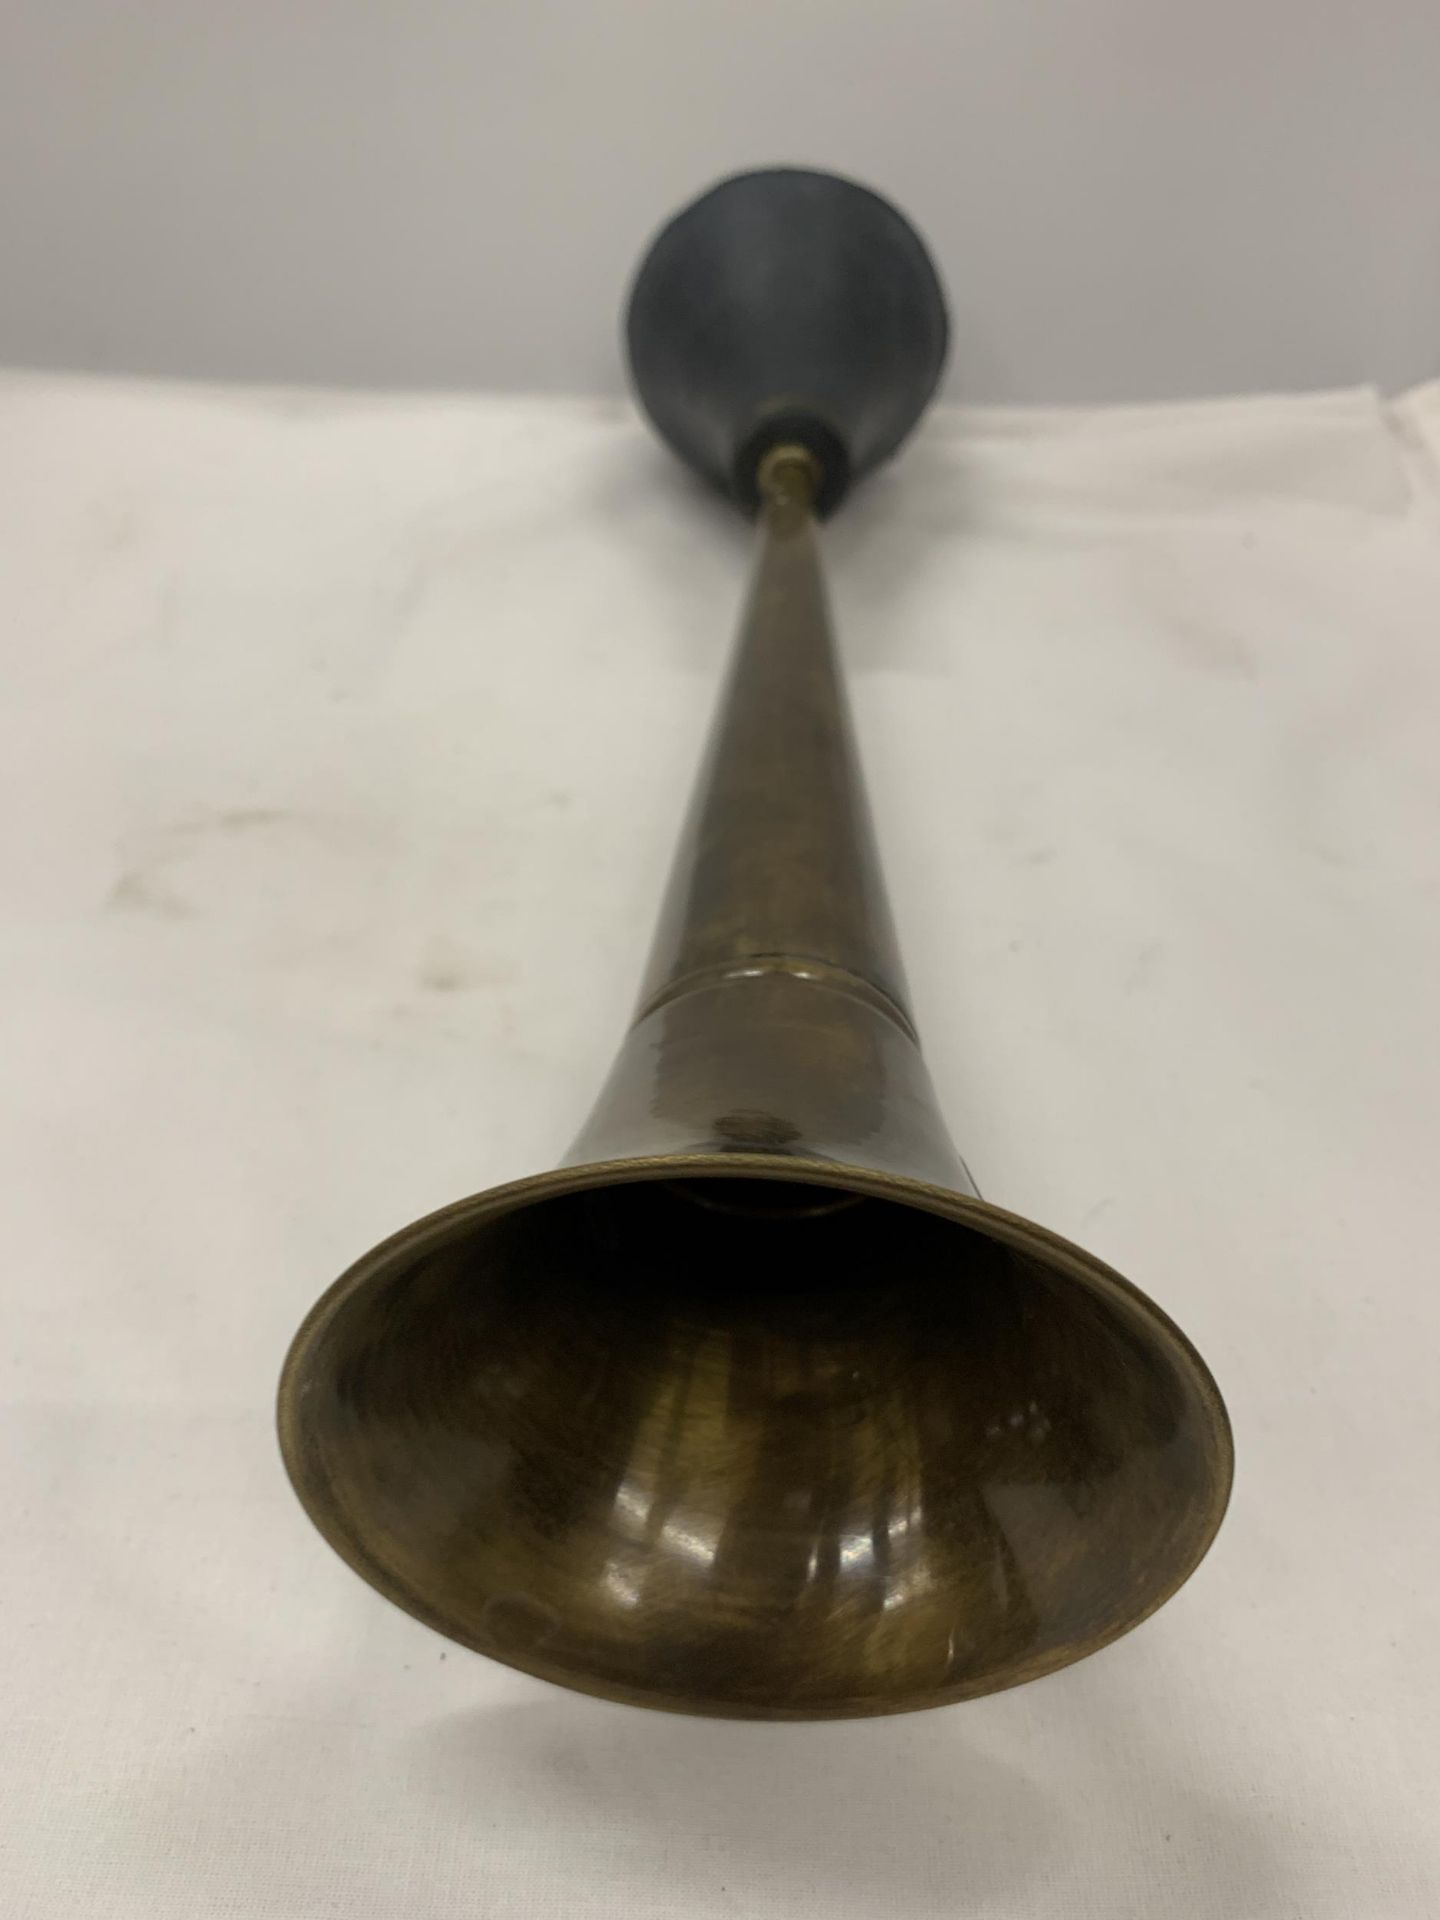 A VINTAGE STYLE BRASS CAR HORN - Image 3 of 3